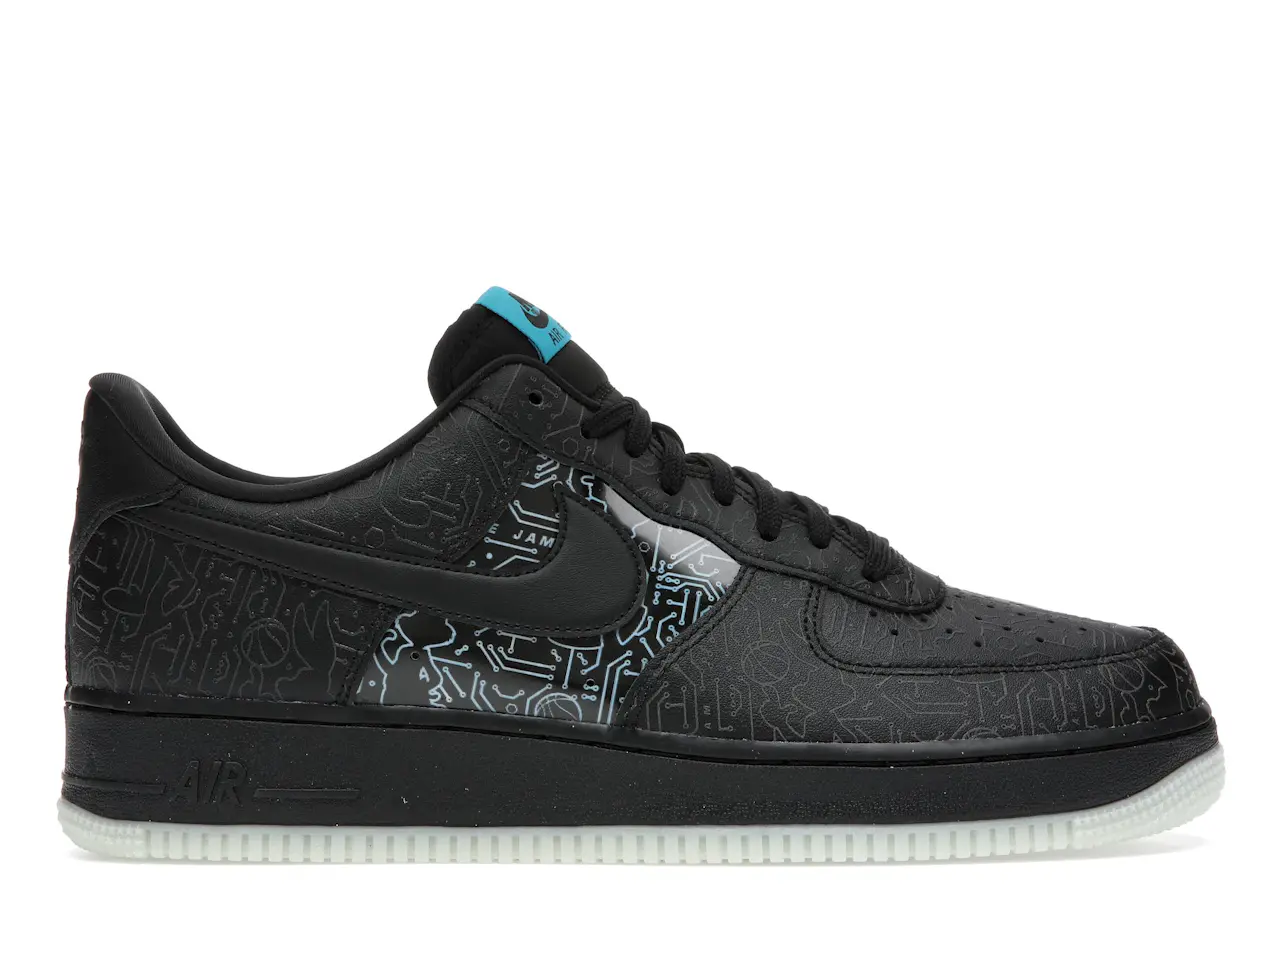 Nike Air Force 1 Low Computer Chip Space Jam Men's - DH5354-001 - US